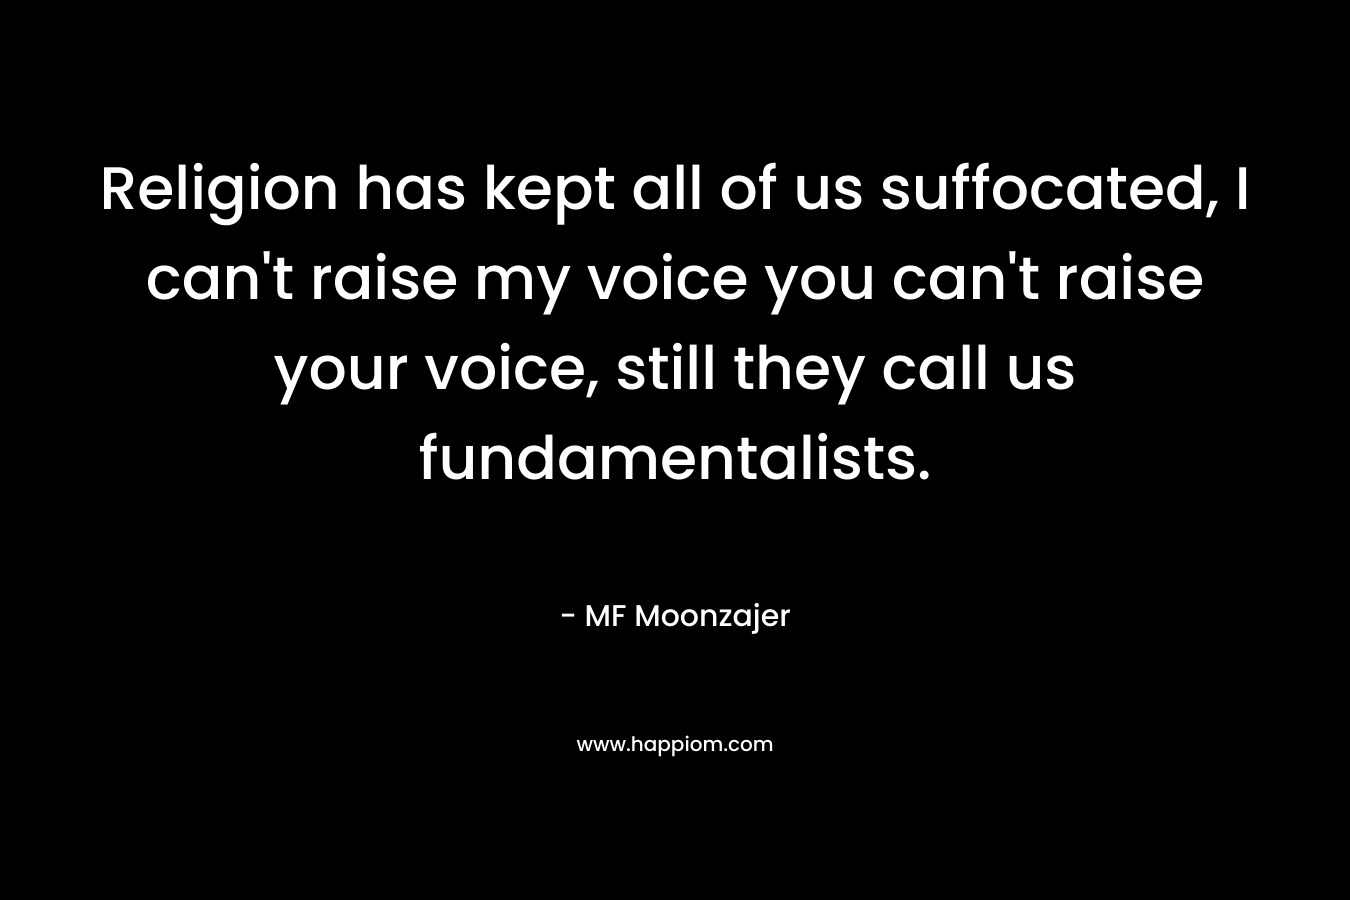 Religion has kept all of us suffocated, I can't raise my voice you can't raise your voice, still they call us fundamentalists.